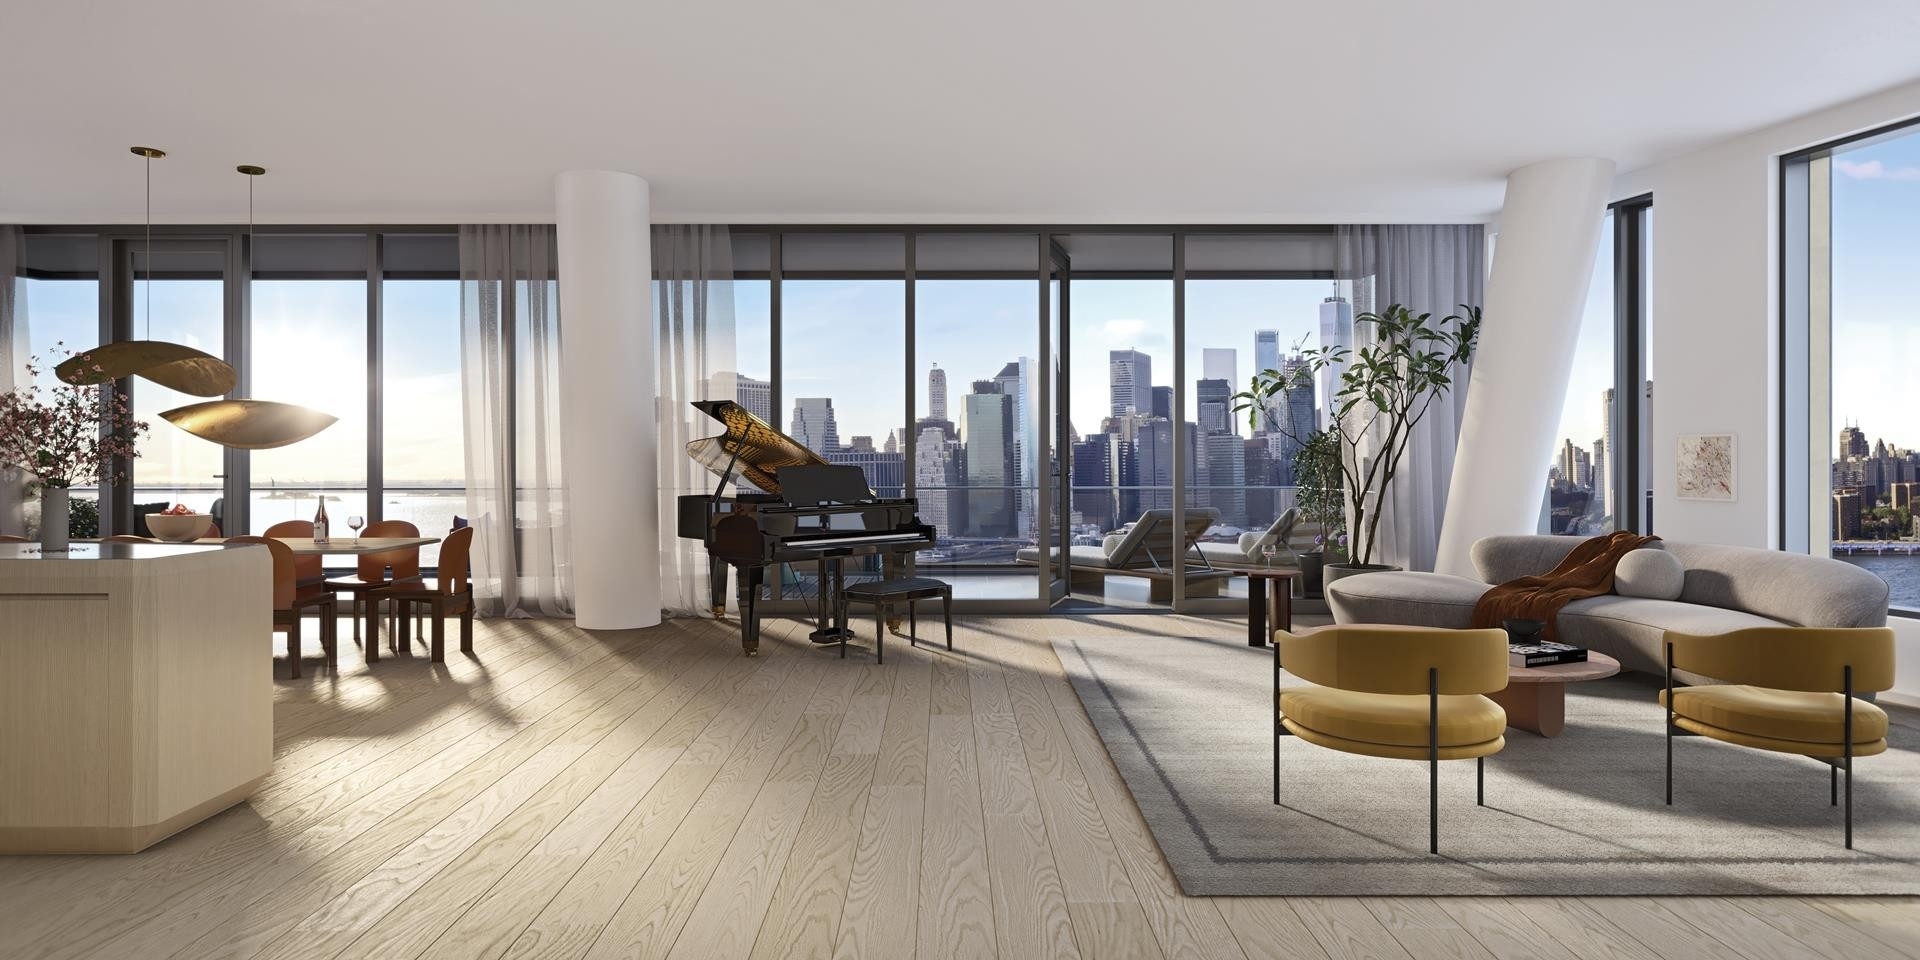 Condominium for Sale at Olympia Dumbo, 30 FRONT ST, 20A Brooklyn, NY 11201